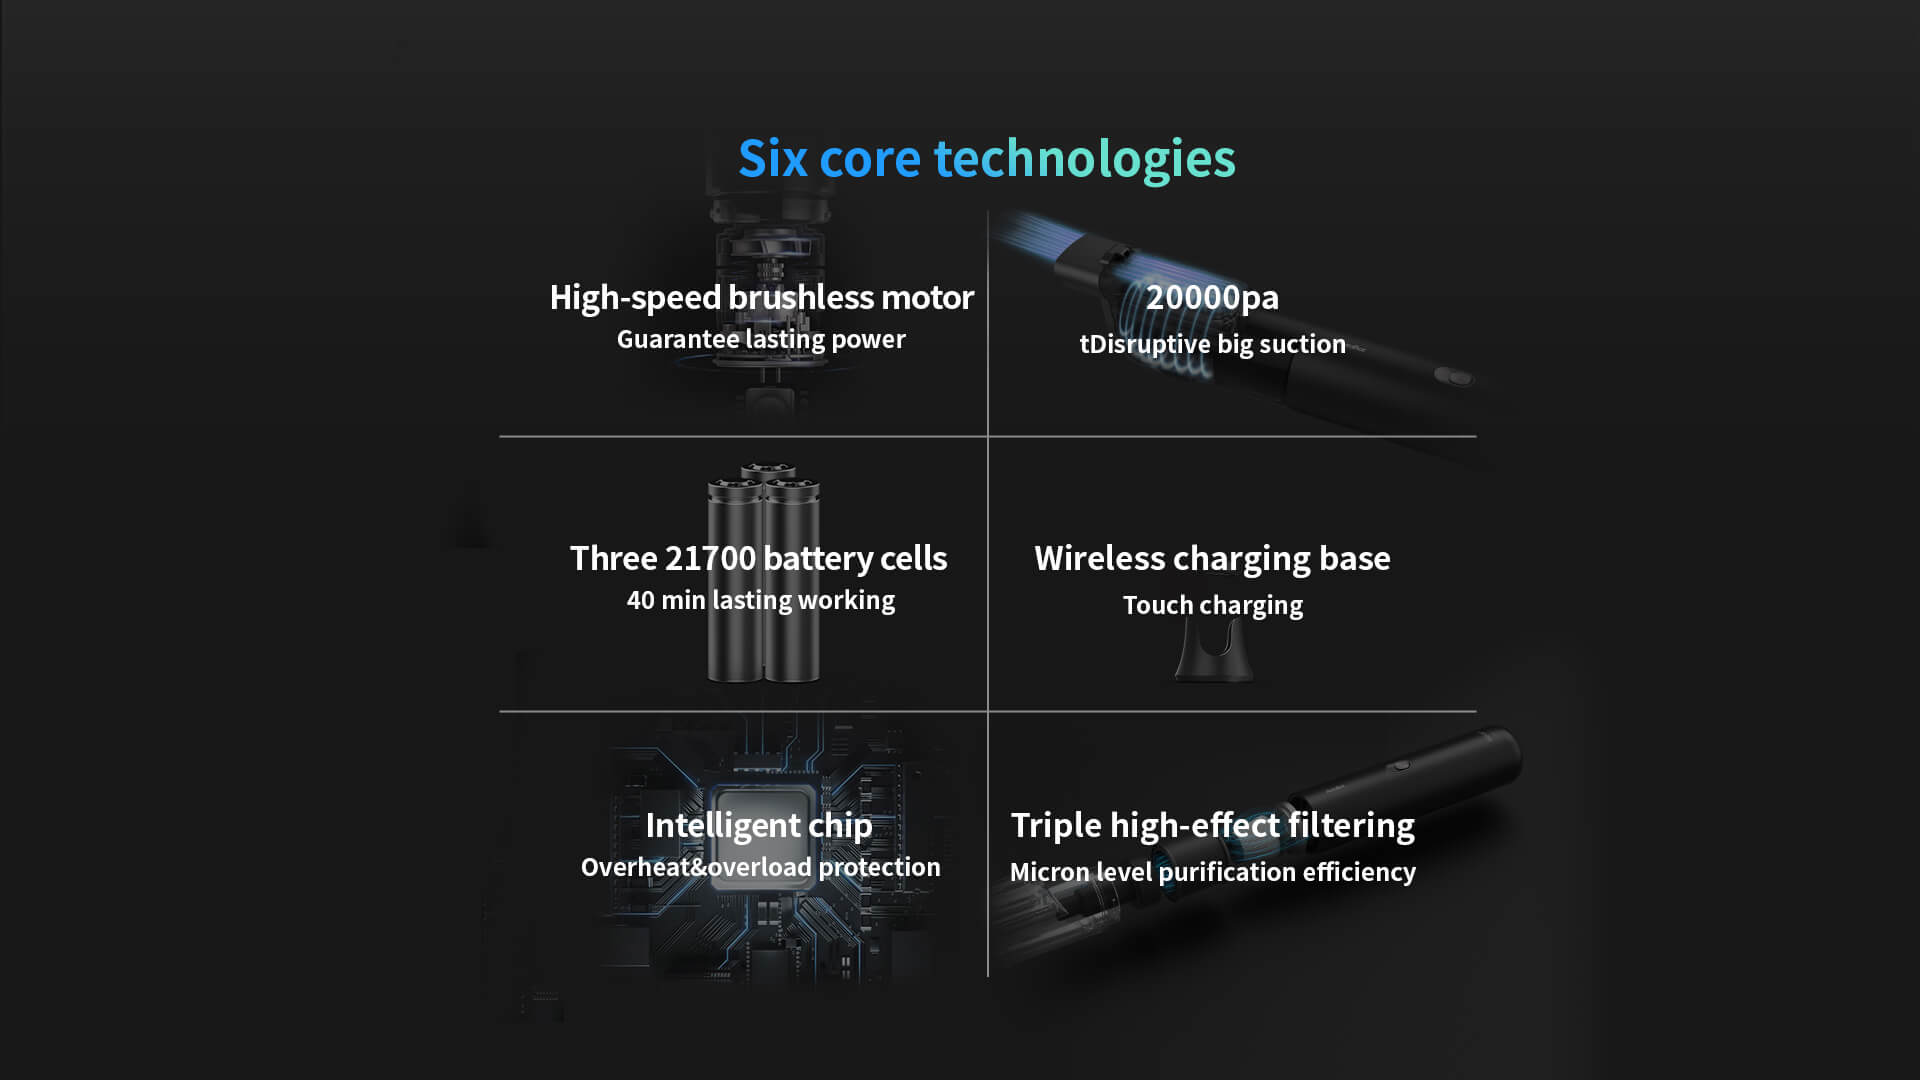 Six core technologies High-speed brushless motor Guarantee lasting power 20000pa tDisruptive bid suction. Three 21700 battery cells 40min lasting working Wireless charging base Touch charging Intelligent chip Overheat&overload protectino Triple high-effect filtering Micron level purification efficiency